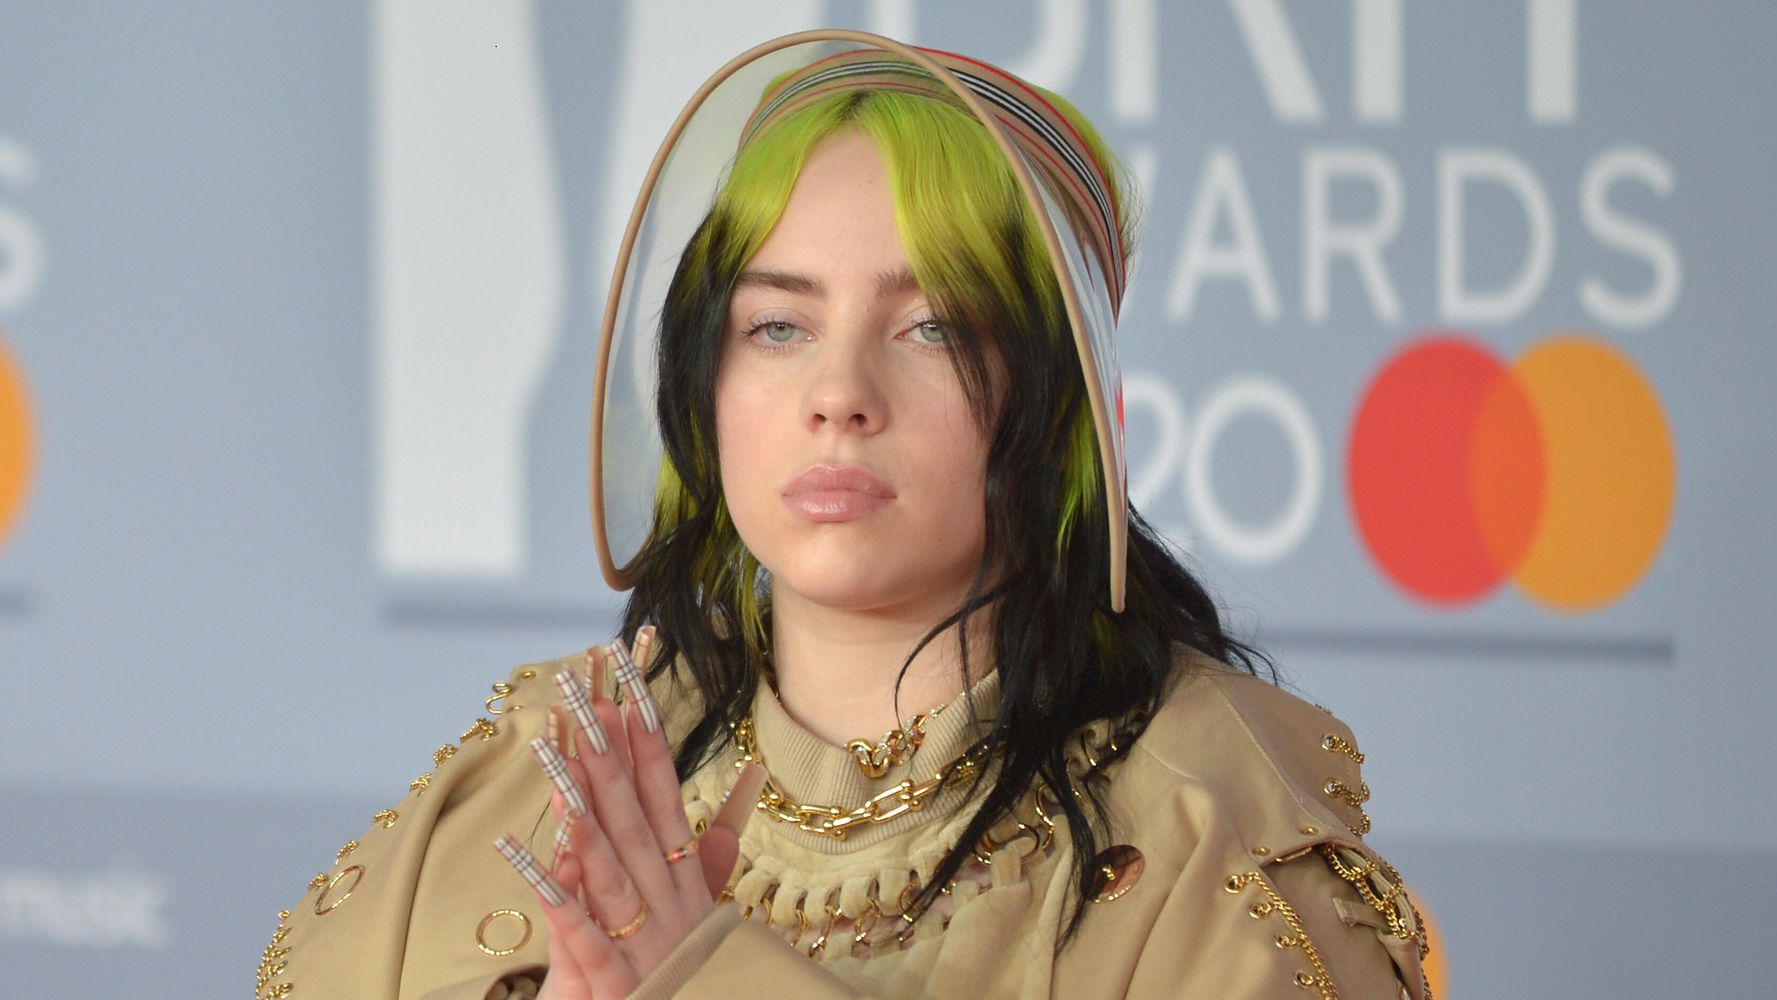 Billie Eilish Shares Video On 'Real Bodies' After Body-Shaming Tweets - HuffPost